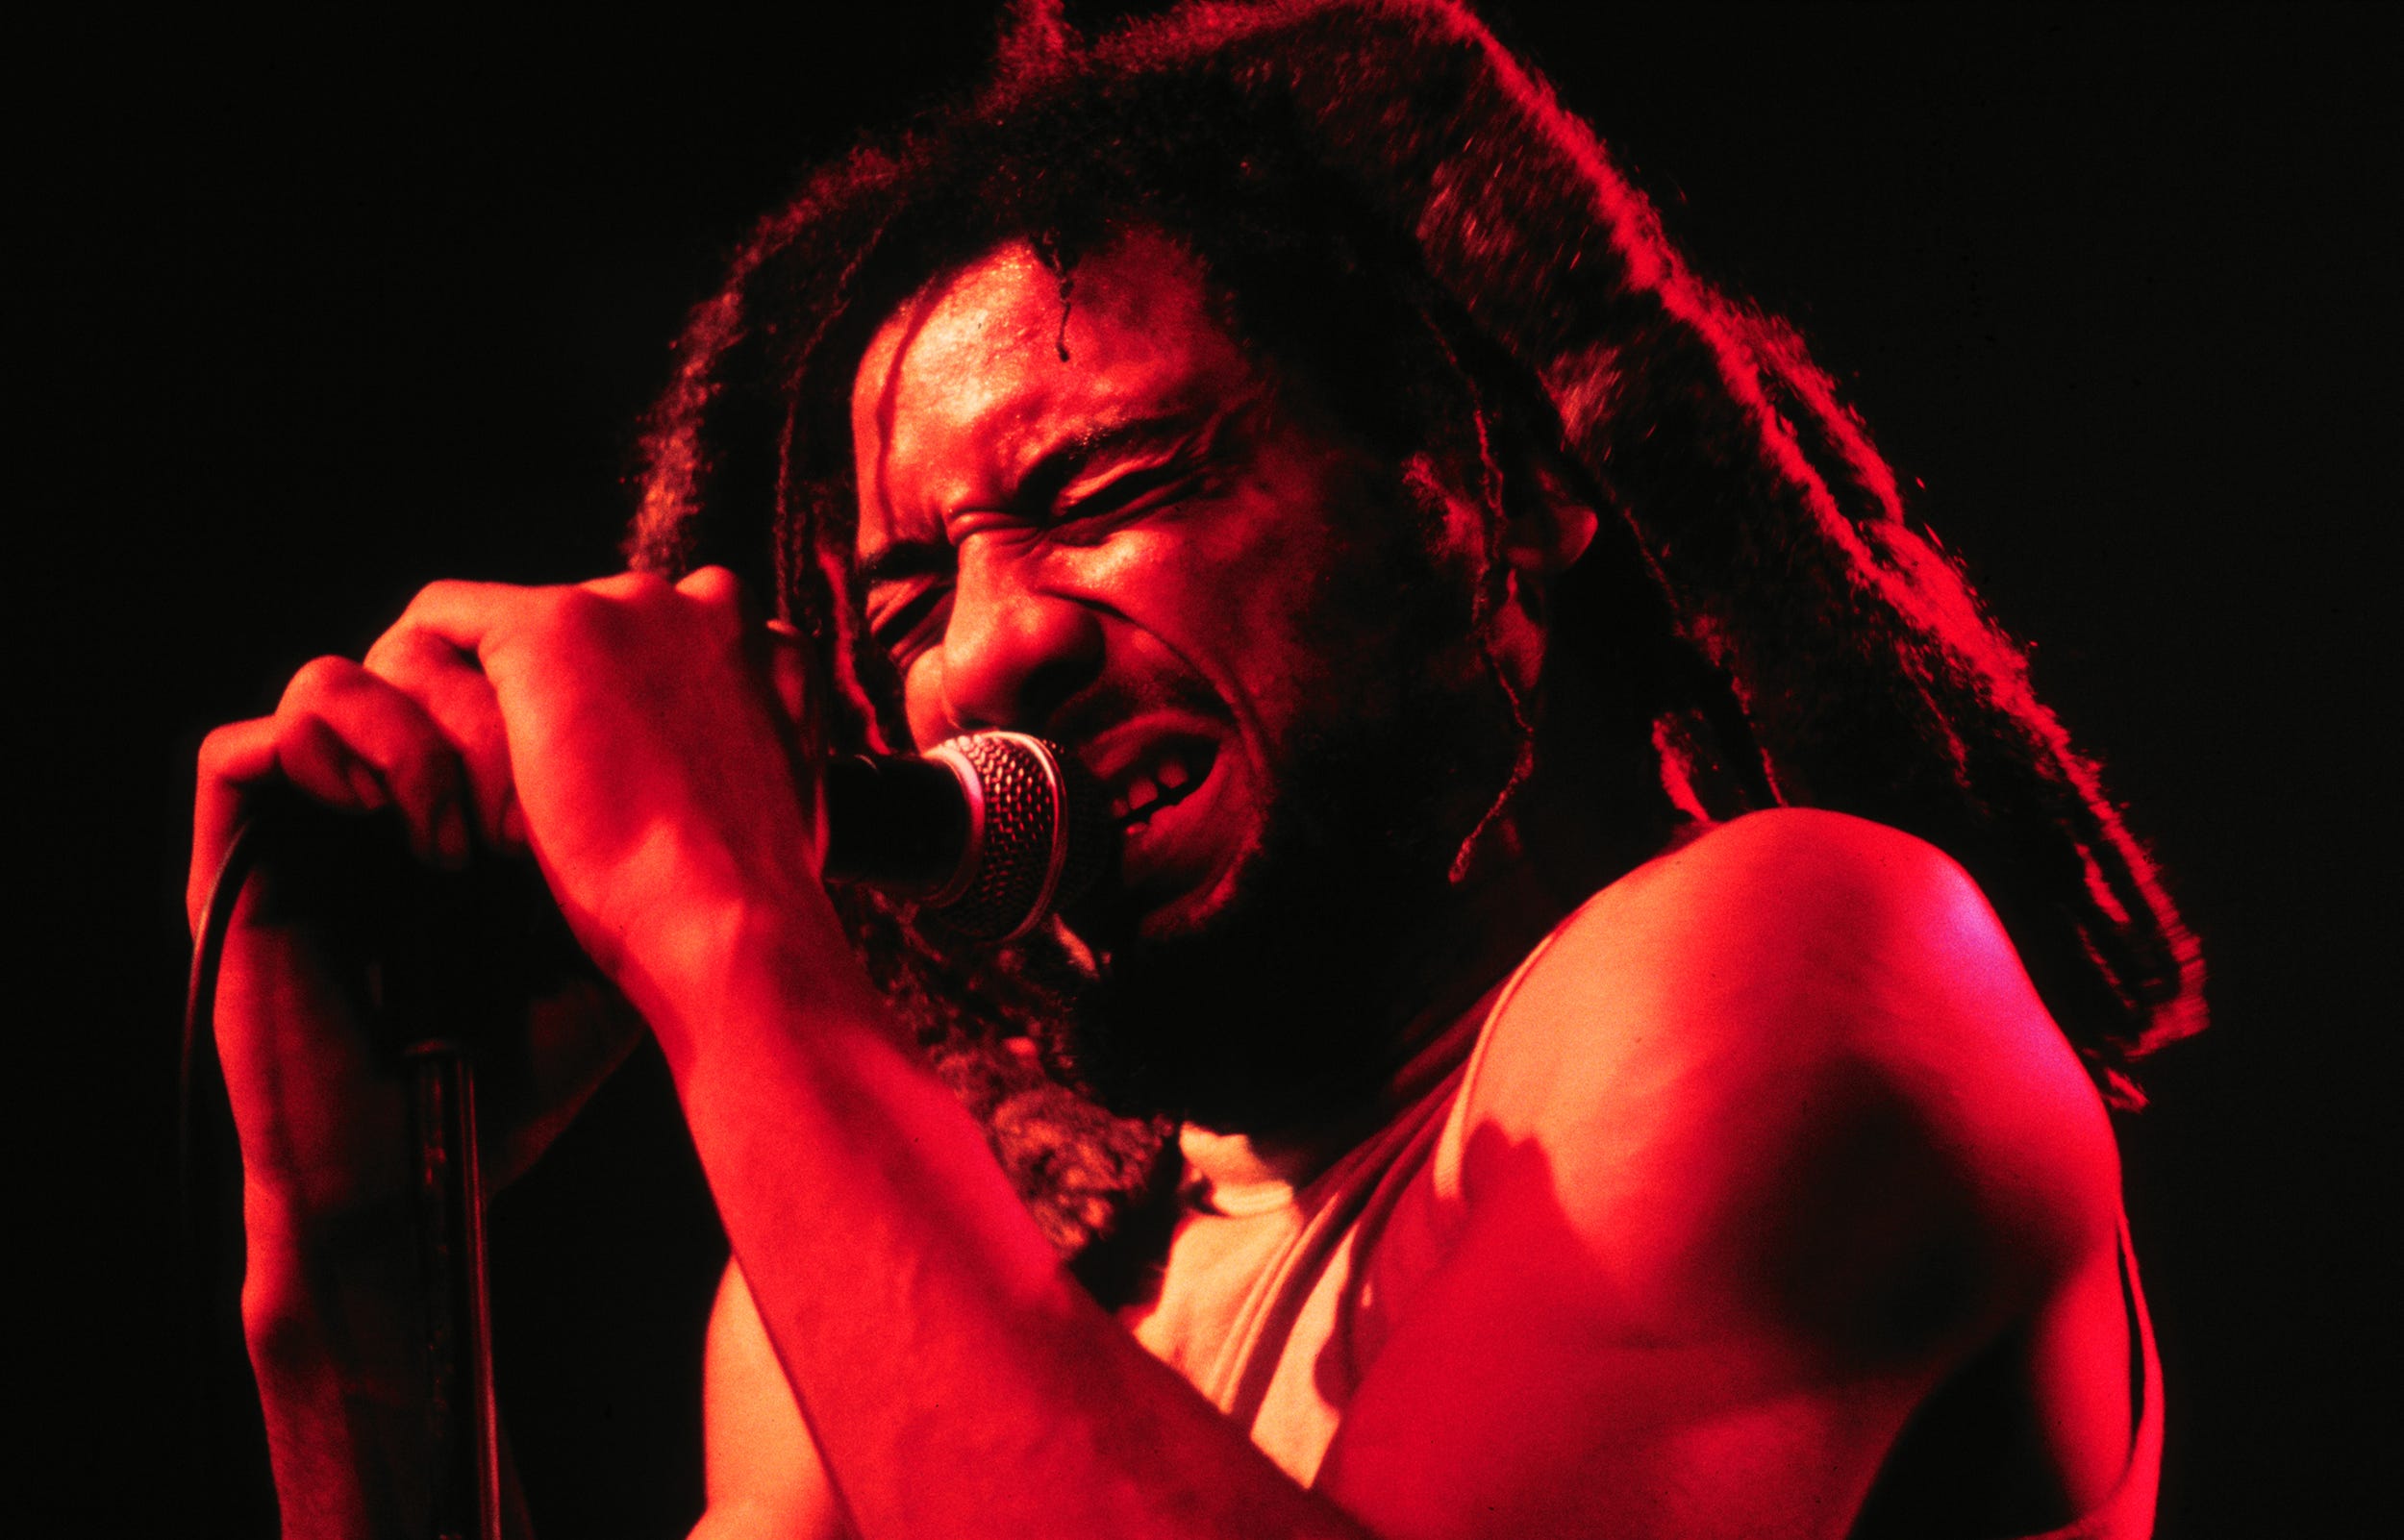 It's been nearly 40 years since Bad Brains shattered stereotypes